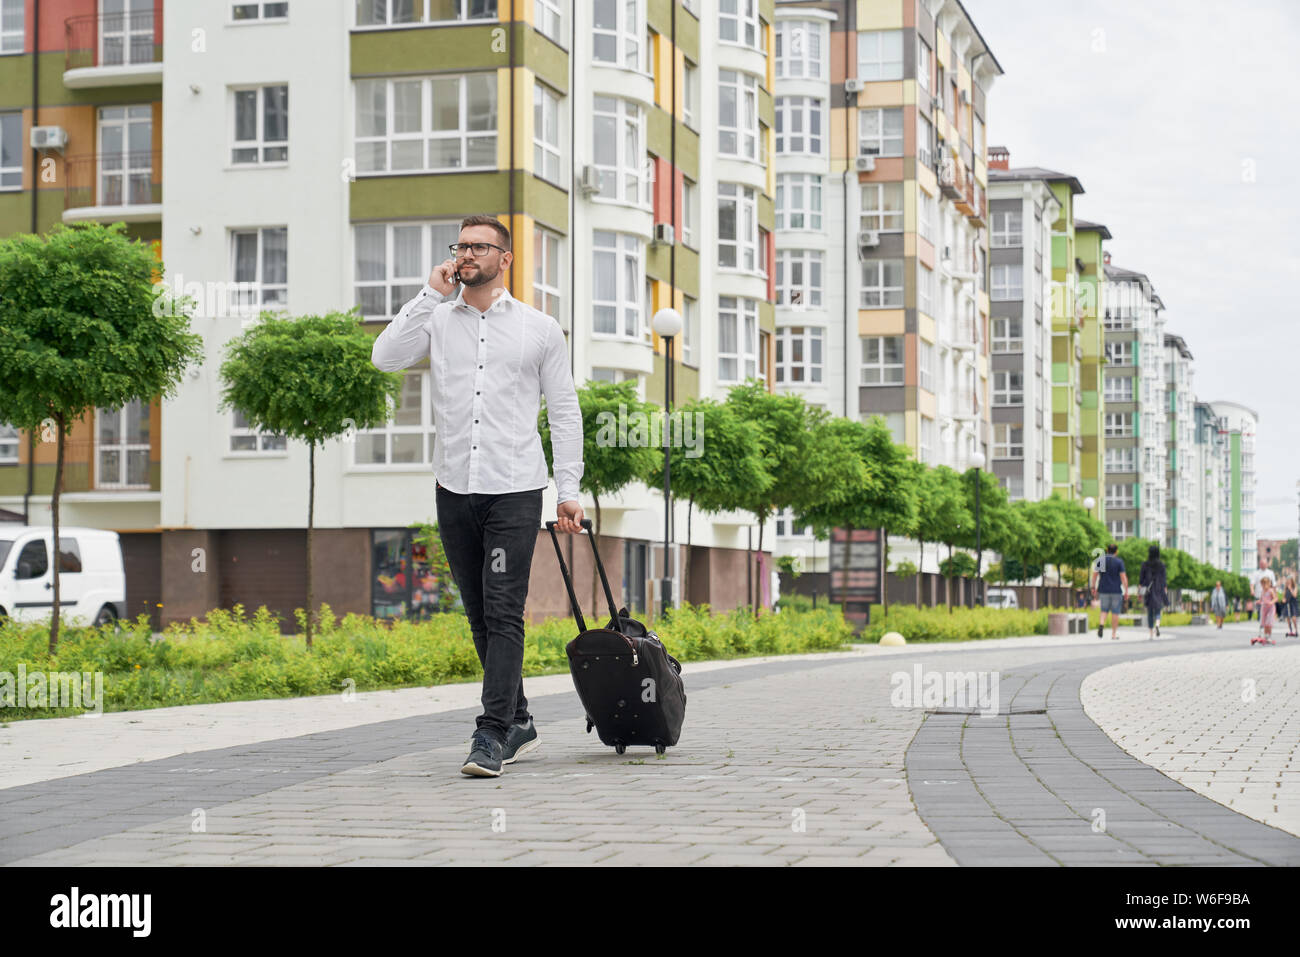 Handsome young man with suitcase walking down street of new apartments buildings. Bearded student in glasses talking by phone, looking at house. Concept of modern city. Stock Photo